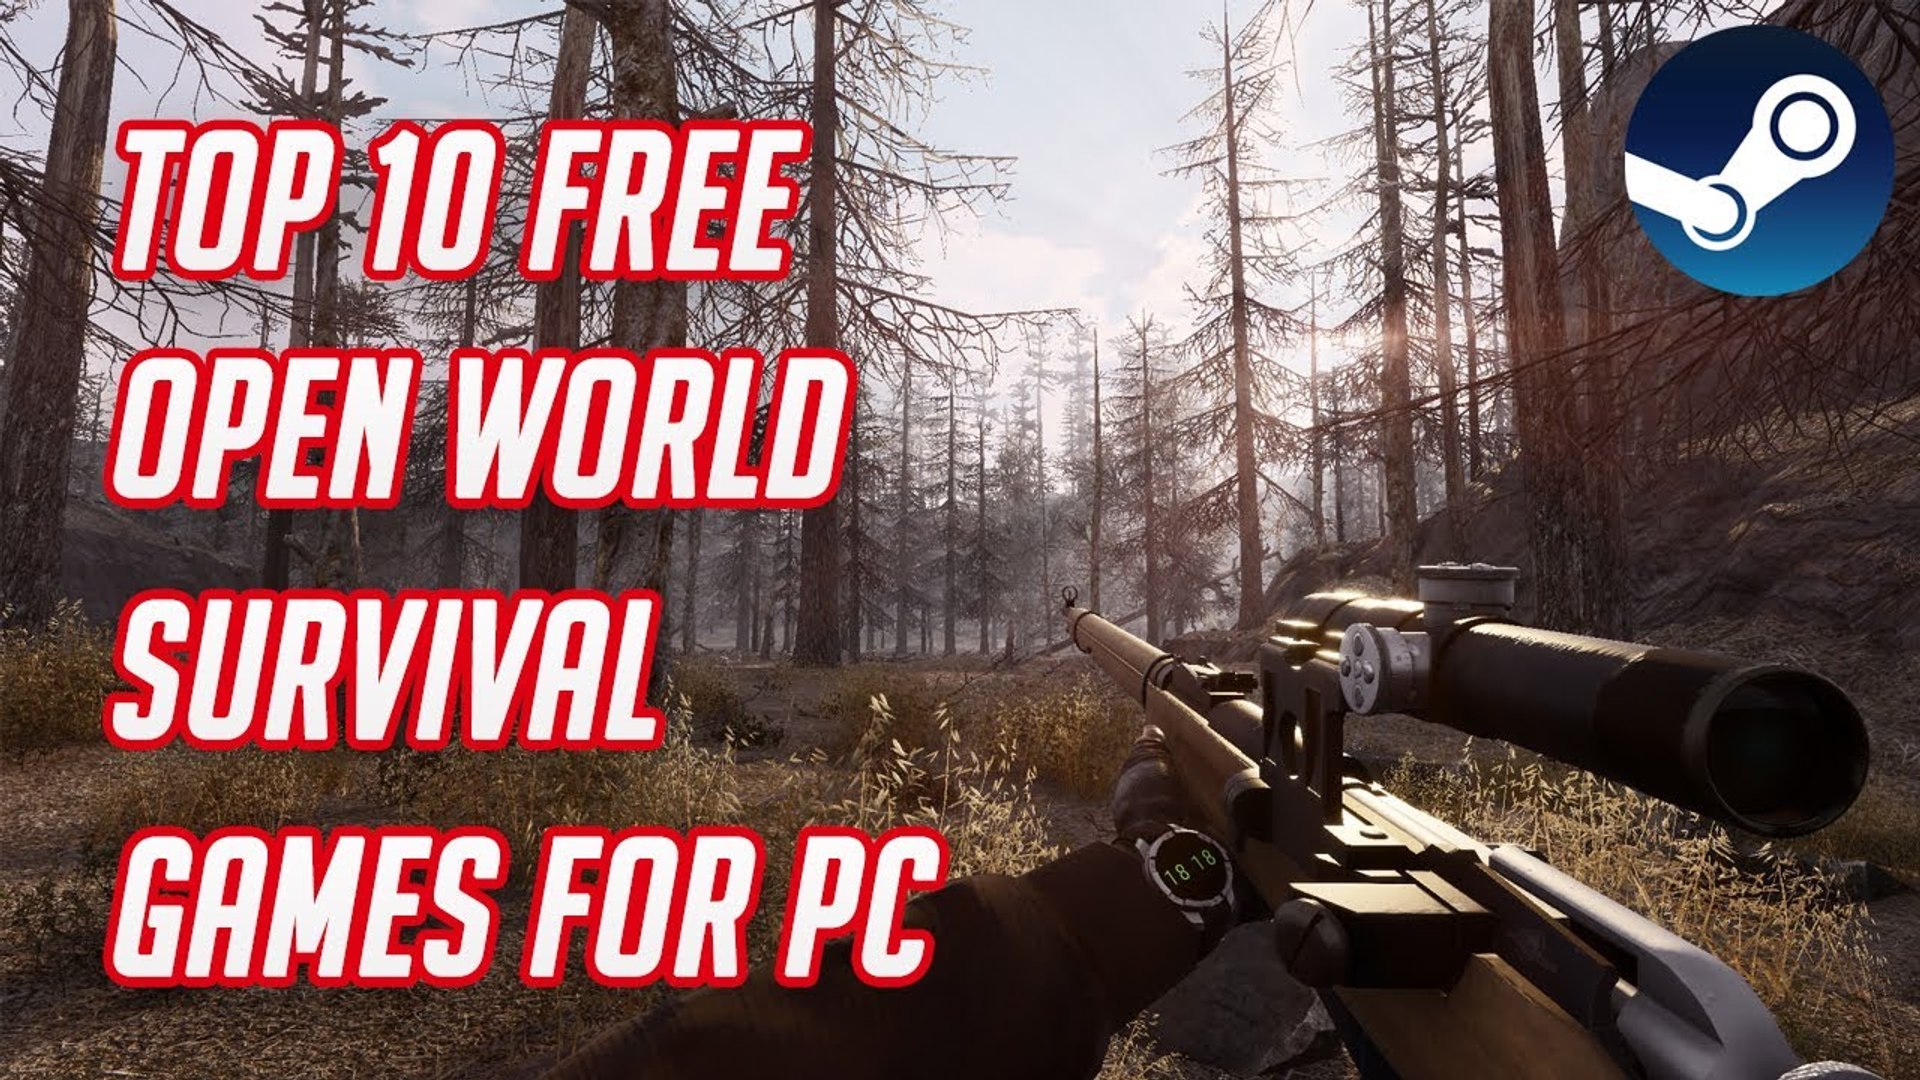 Top 10 FREE Open World Survival Games for PC